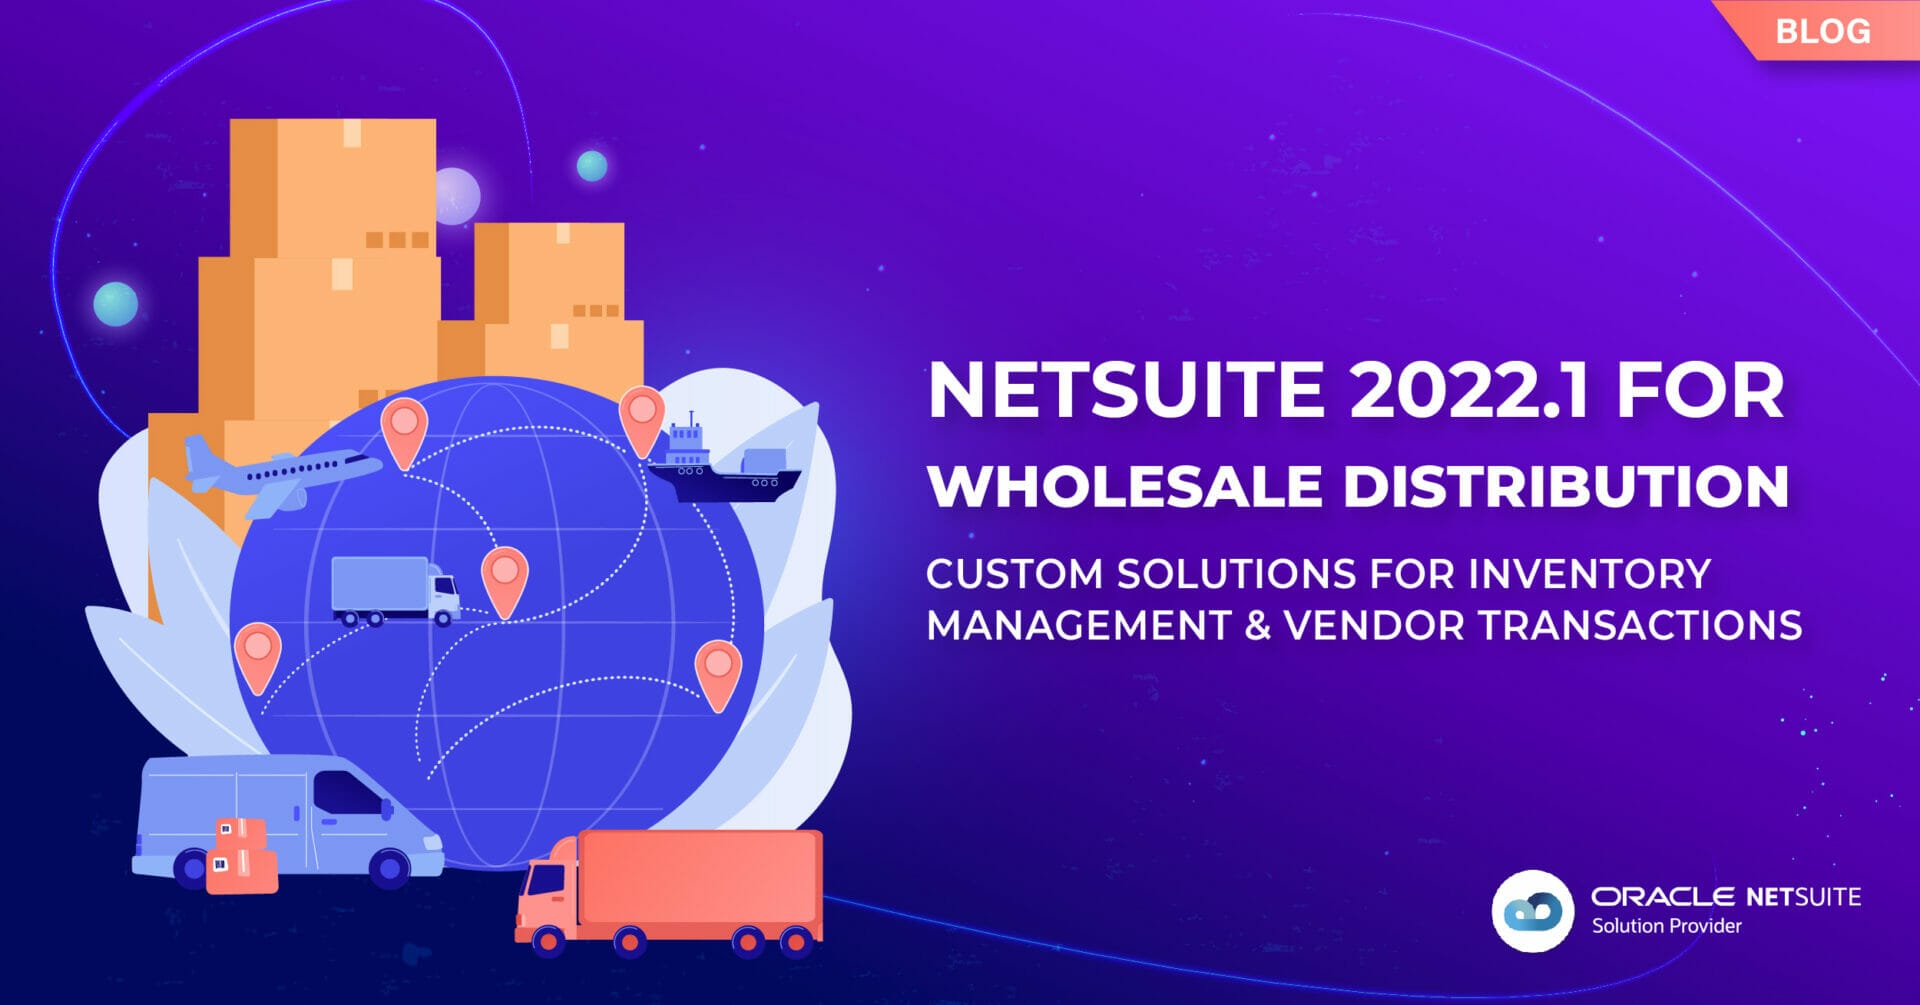 NetSuite 2022.1 Wholesale Distribution Updates Offer Custom Solutions for Inventory Management and Vendor Transactions